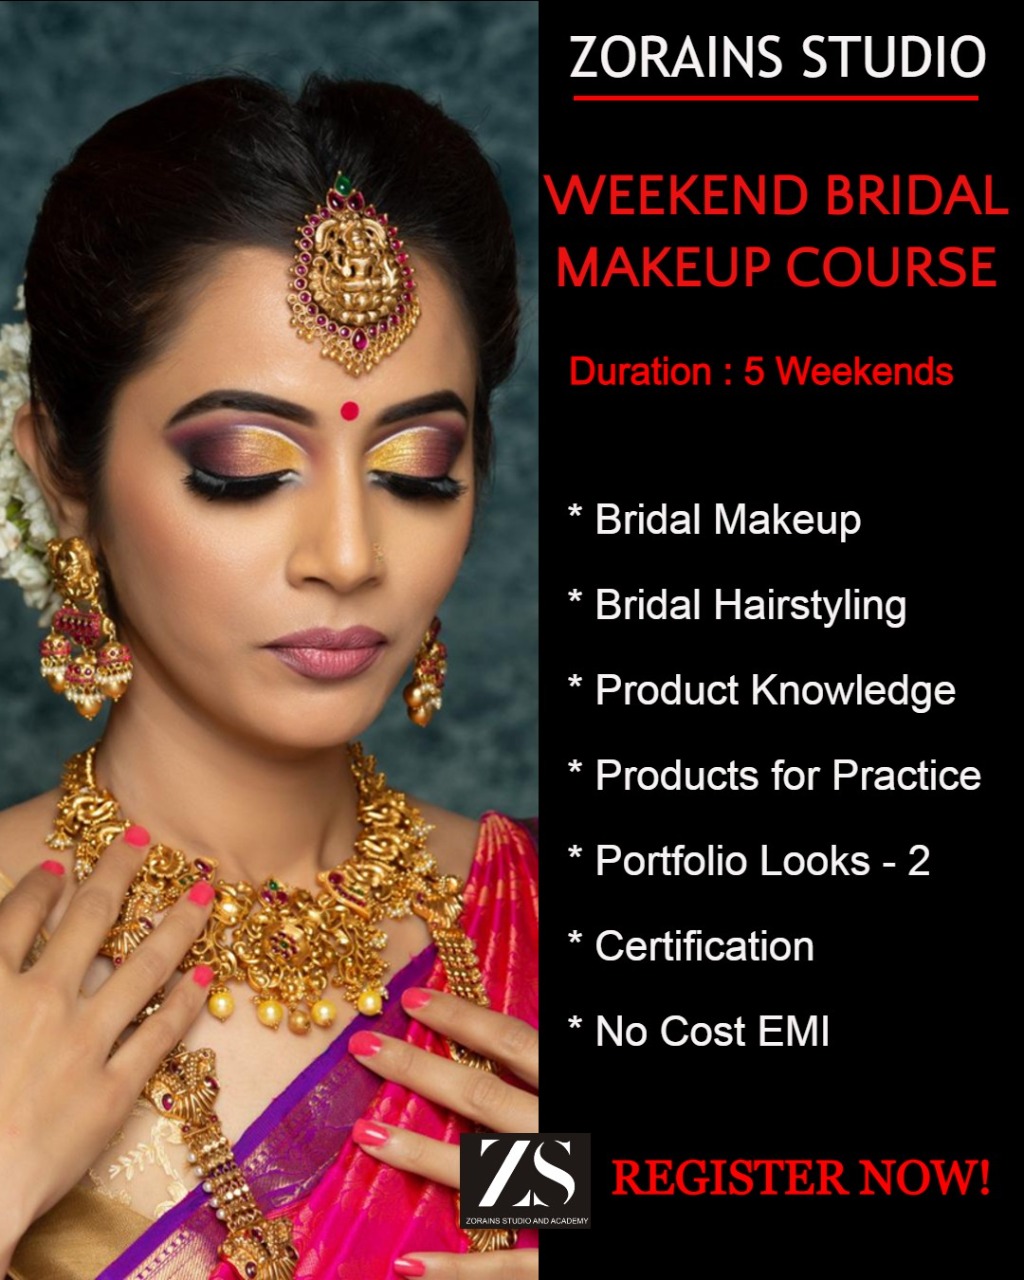 10:30 AM To 2:30 PM 6 Advanced Makeup And Hair Course - 5 Weeks